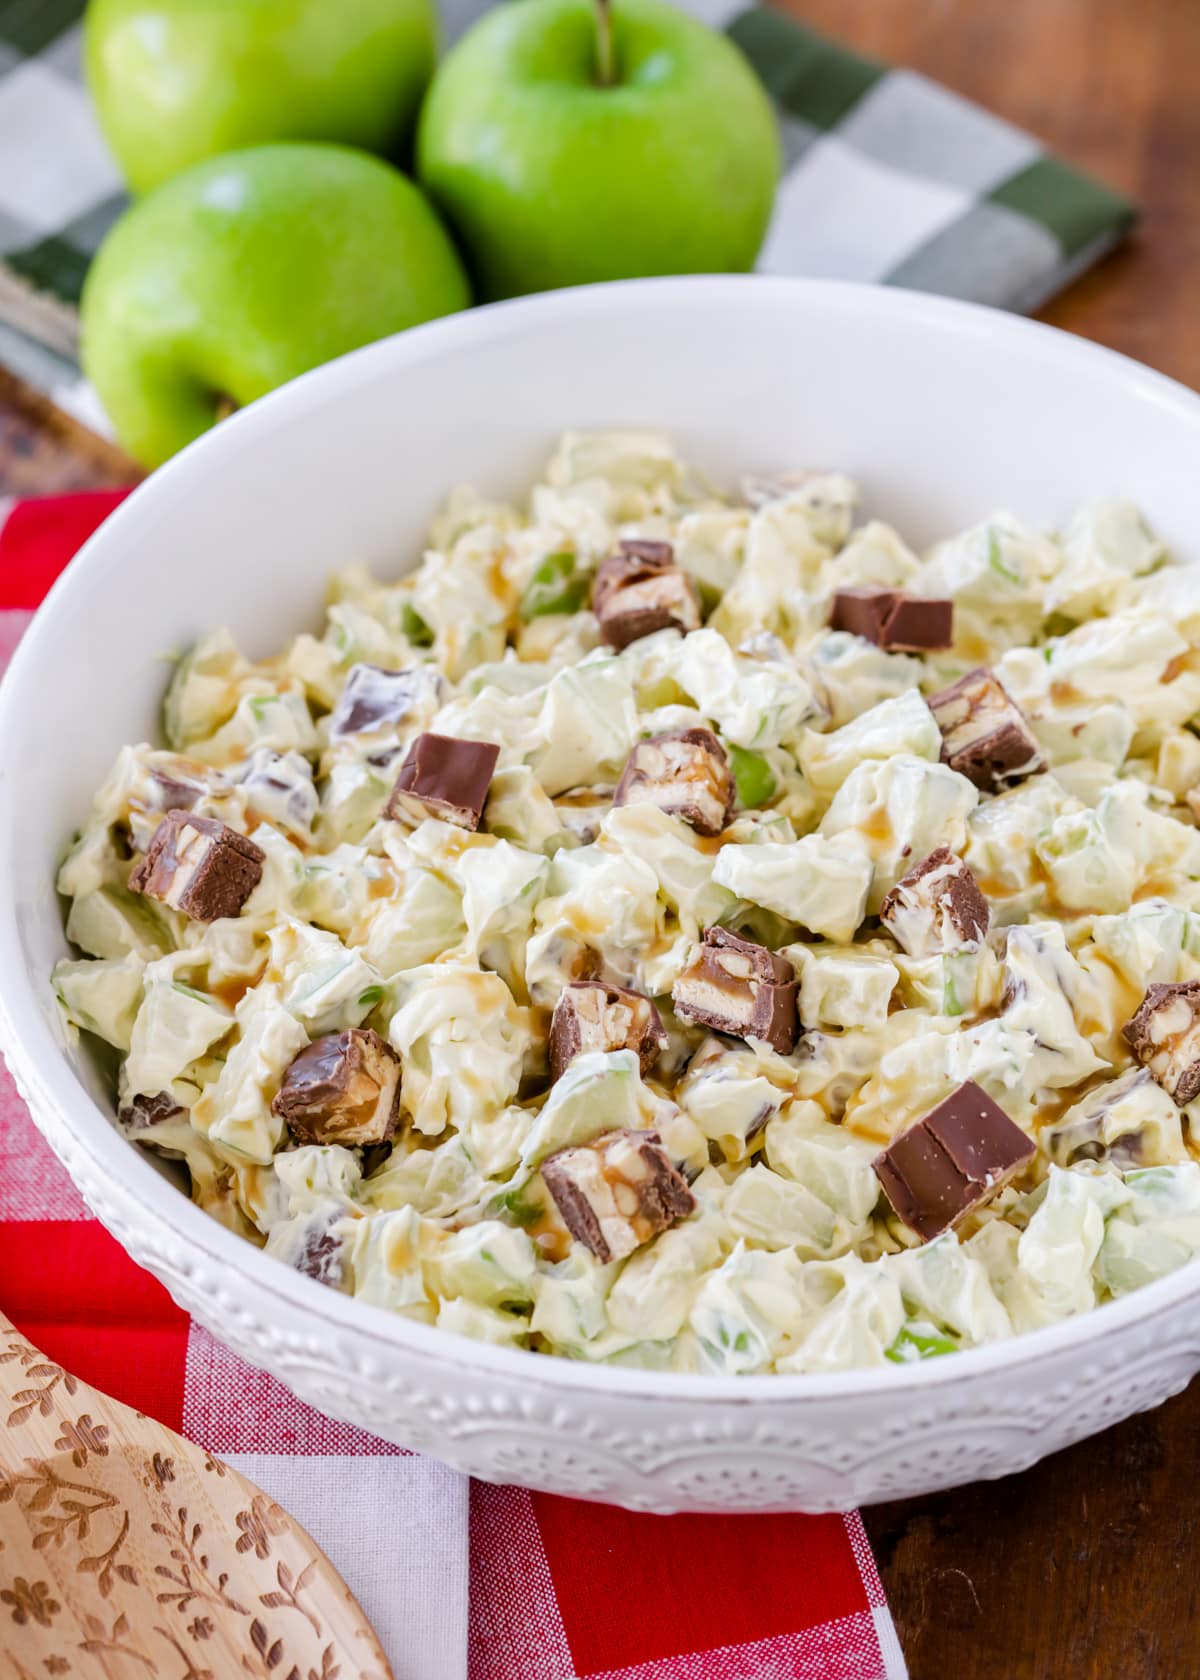 Bowl filled with snicker apple salad.